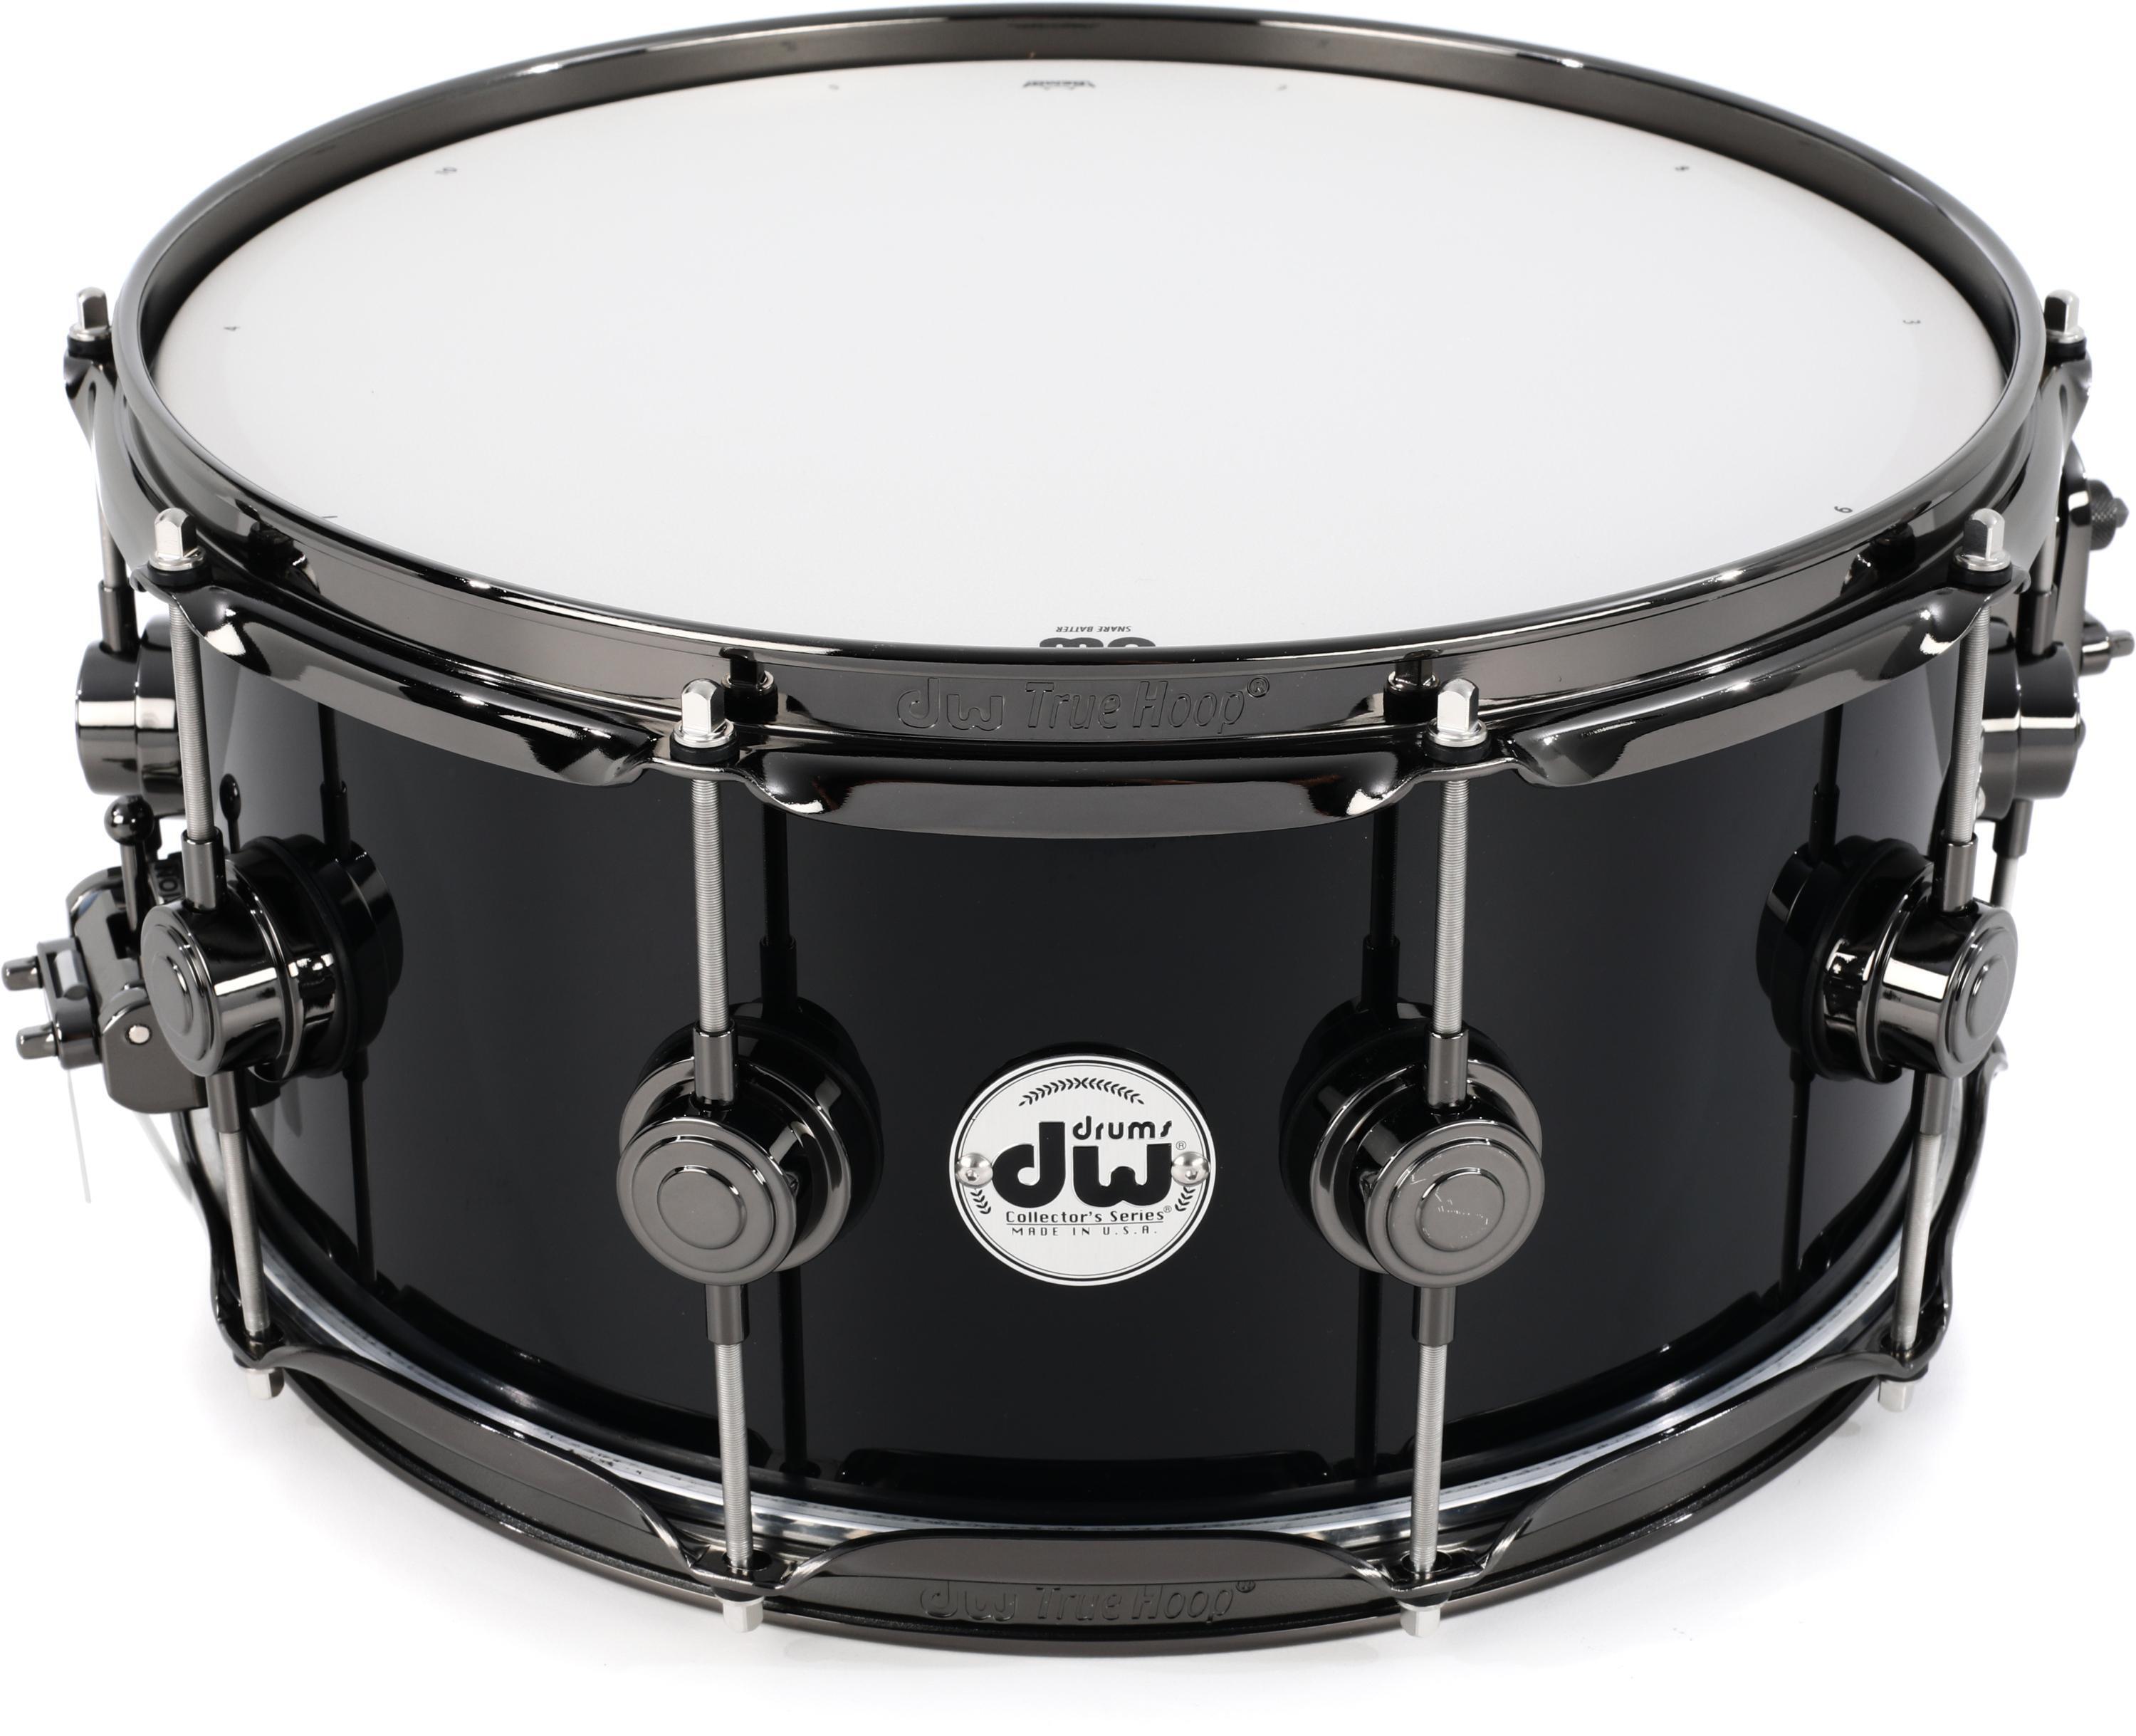 DW Collector's Series Maple Snare Drum - 6.5 x 14-inch - Gloss Black